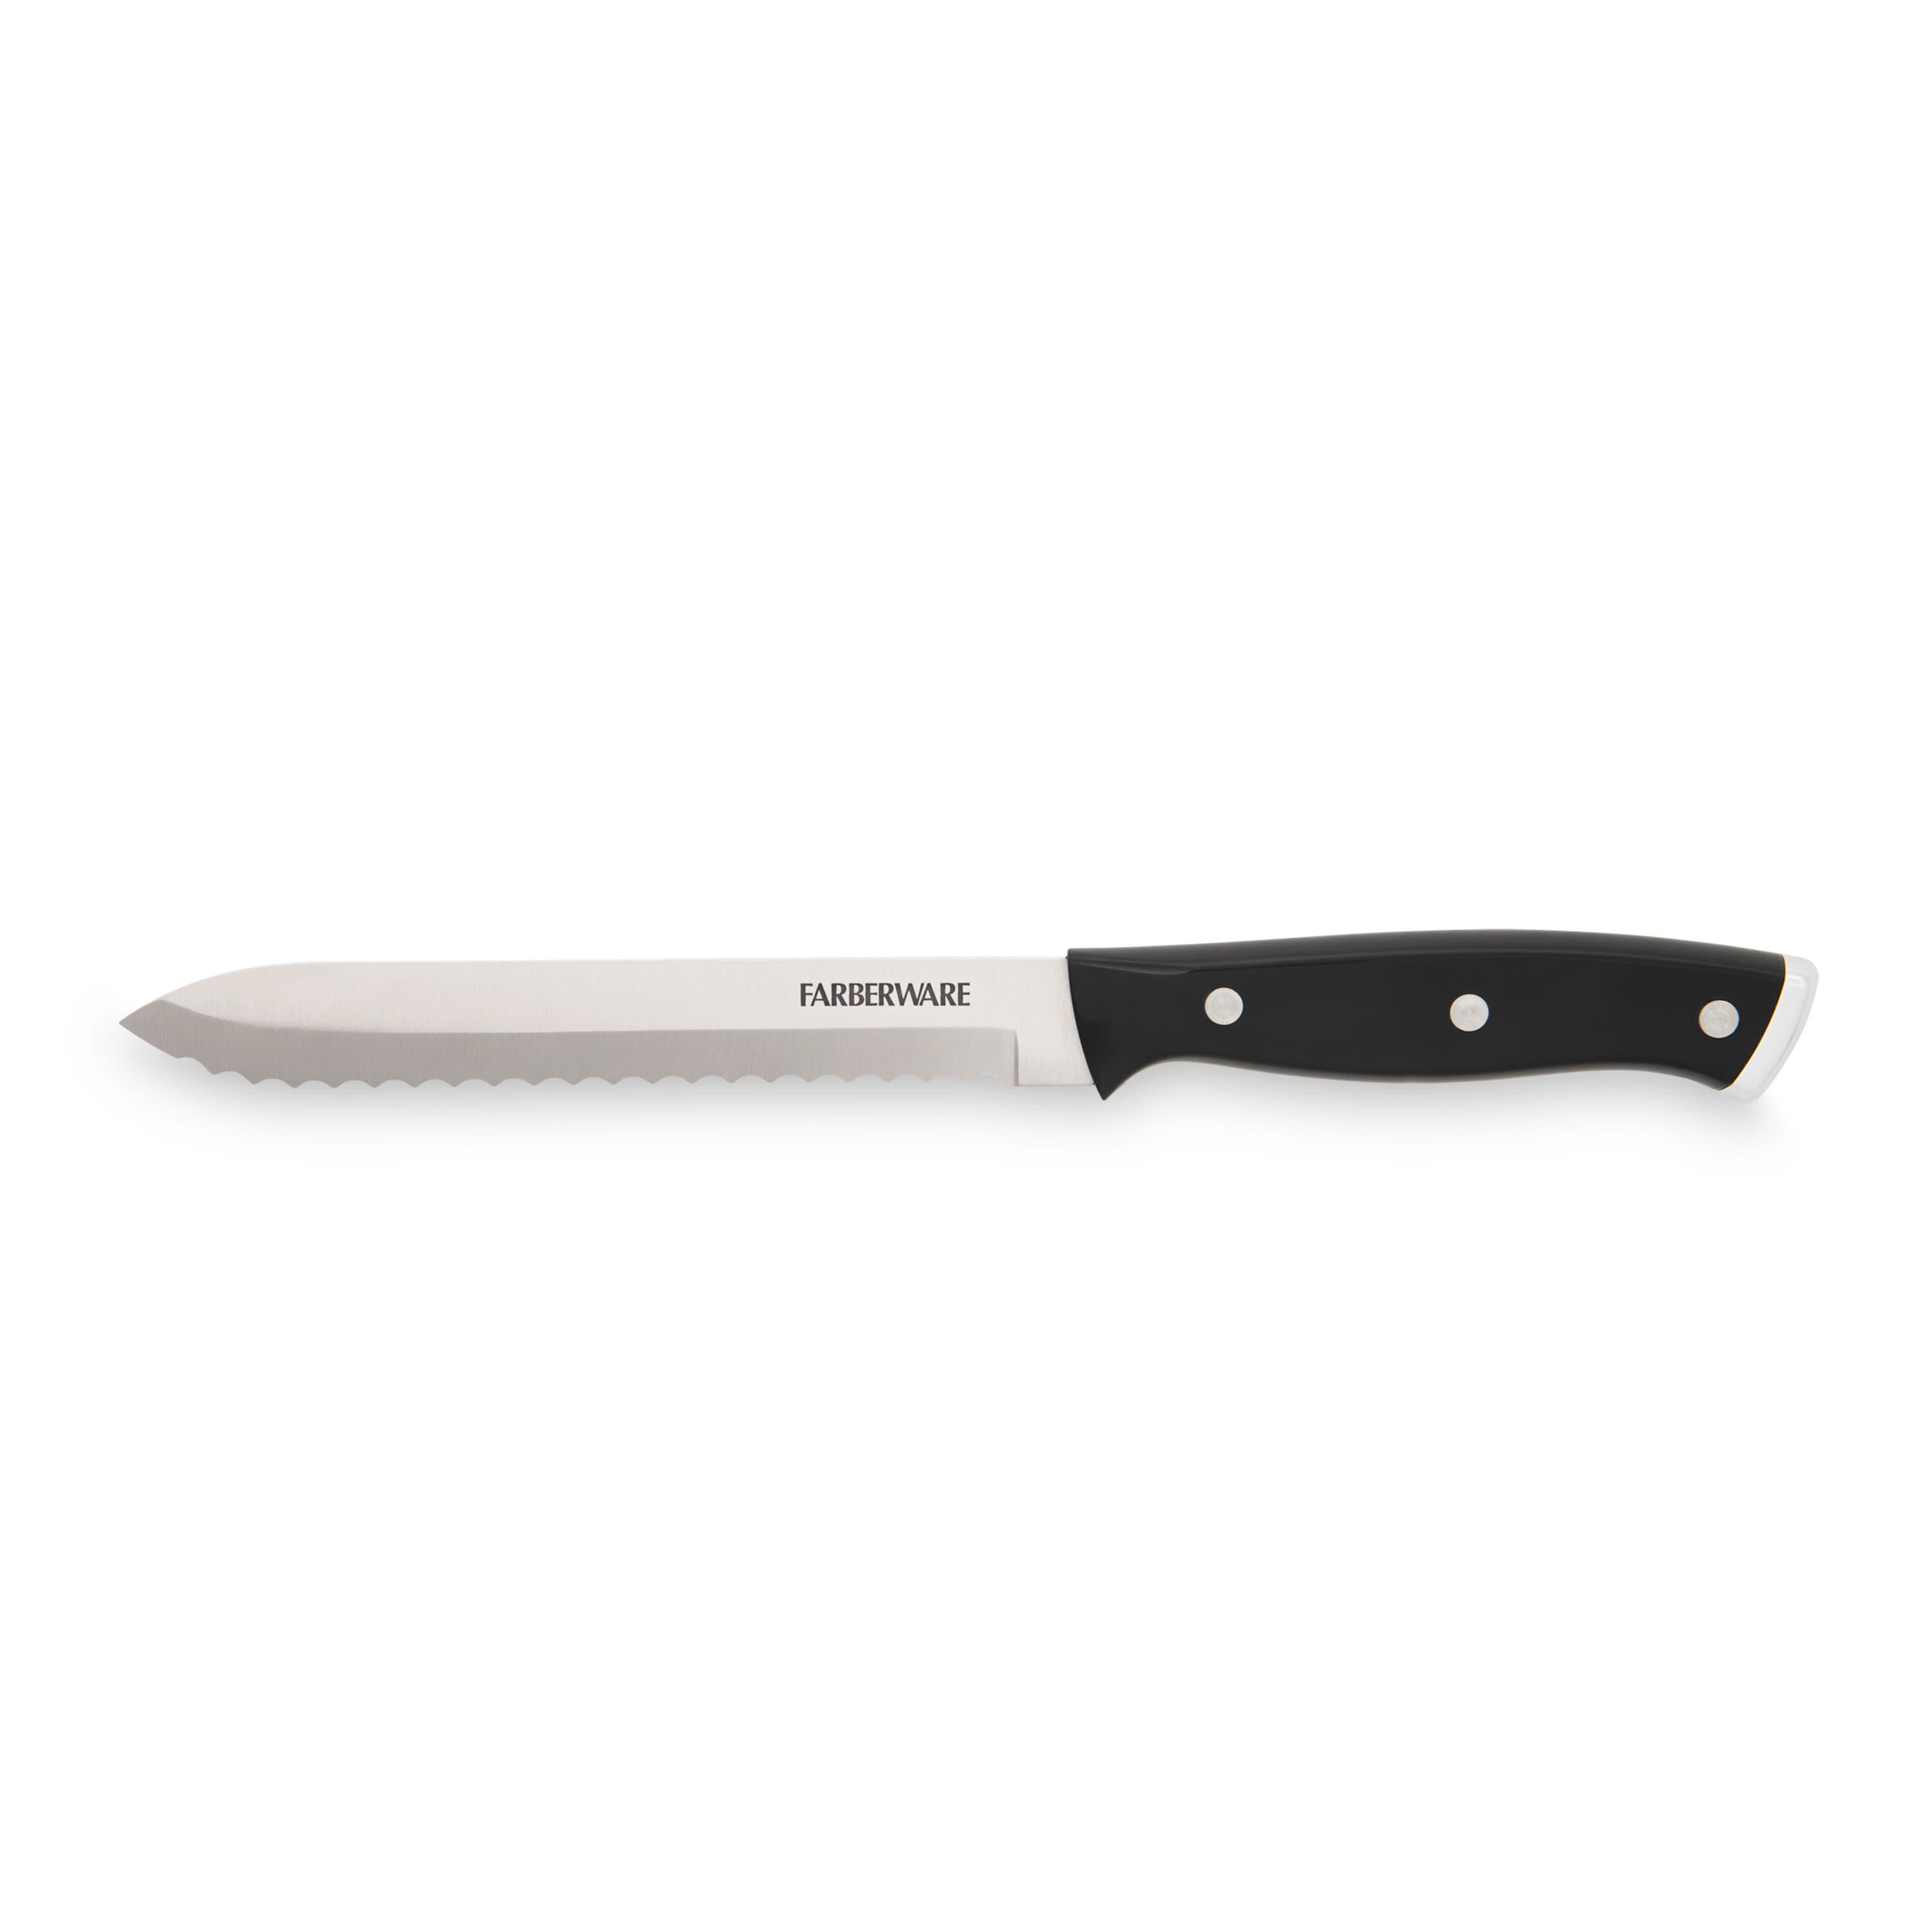 Farberware Classic 5.5-inch Triple Riveted Utility Knife with Endcap and Black Handle